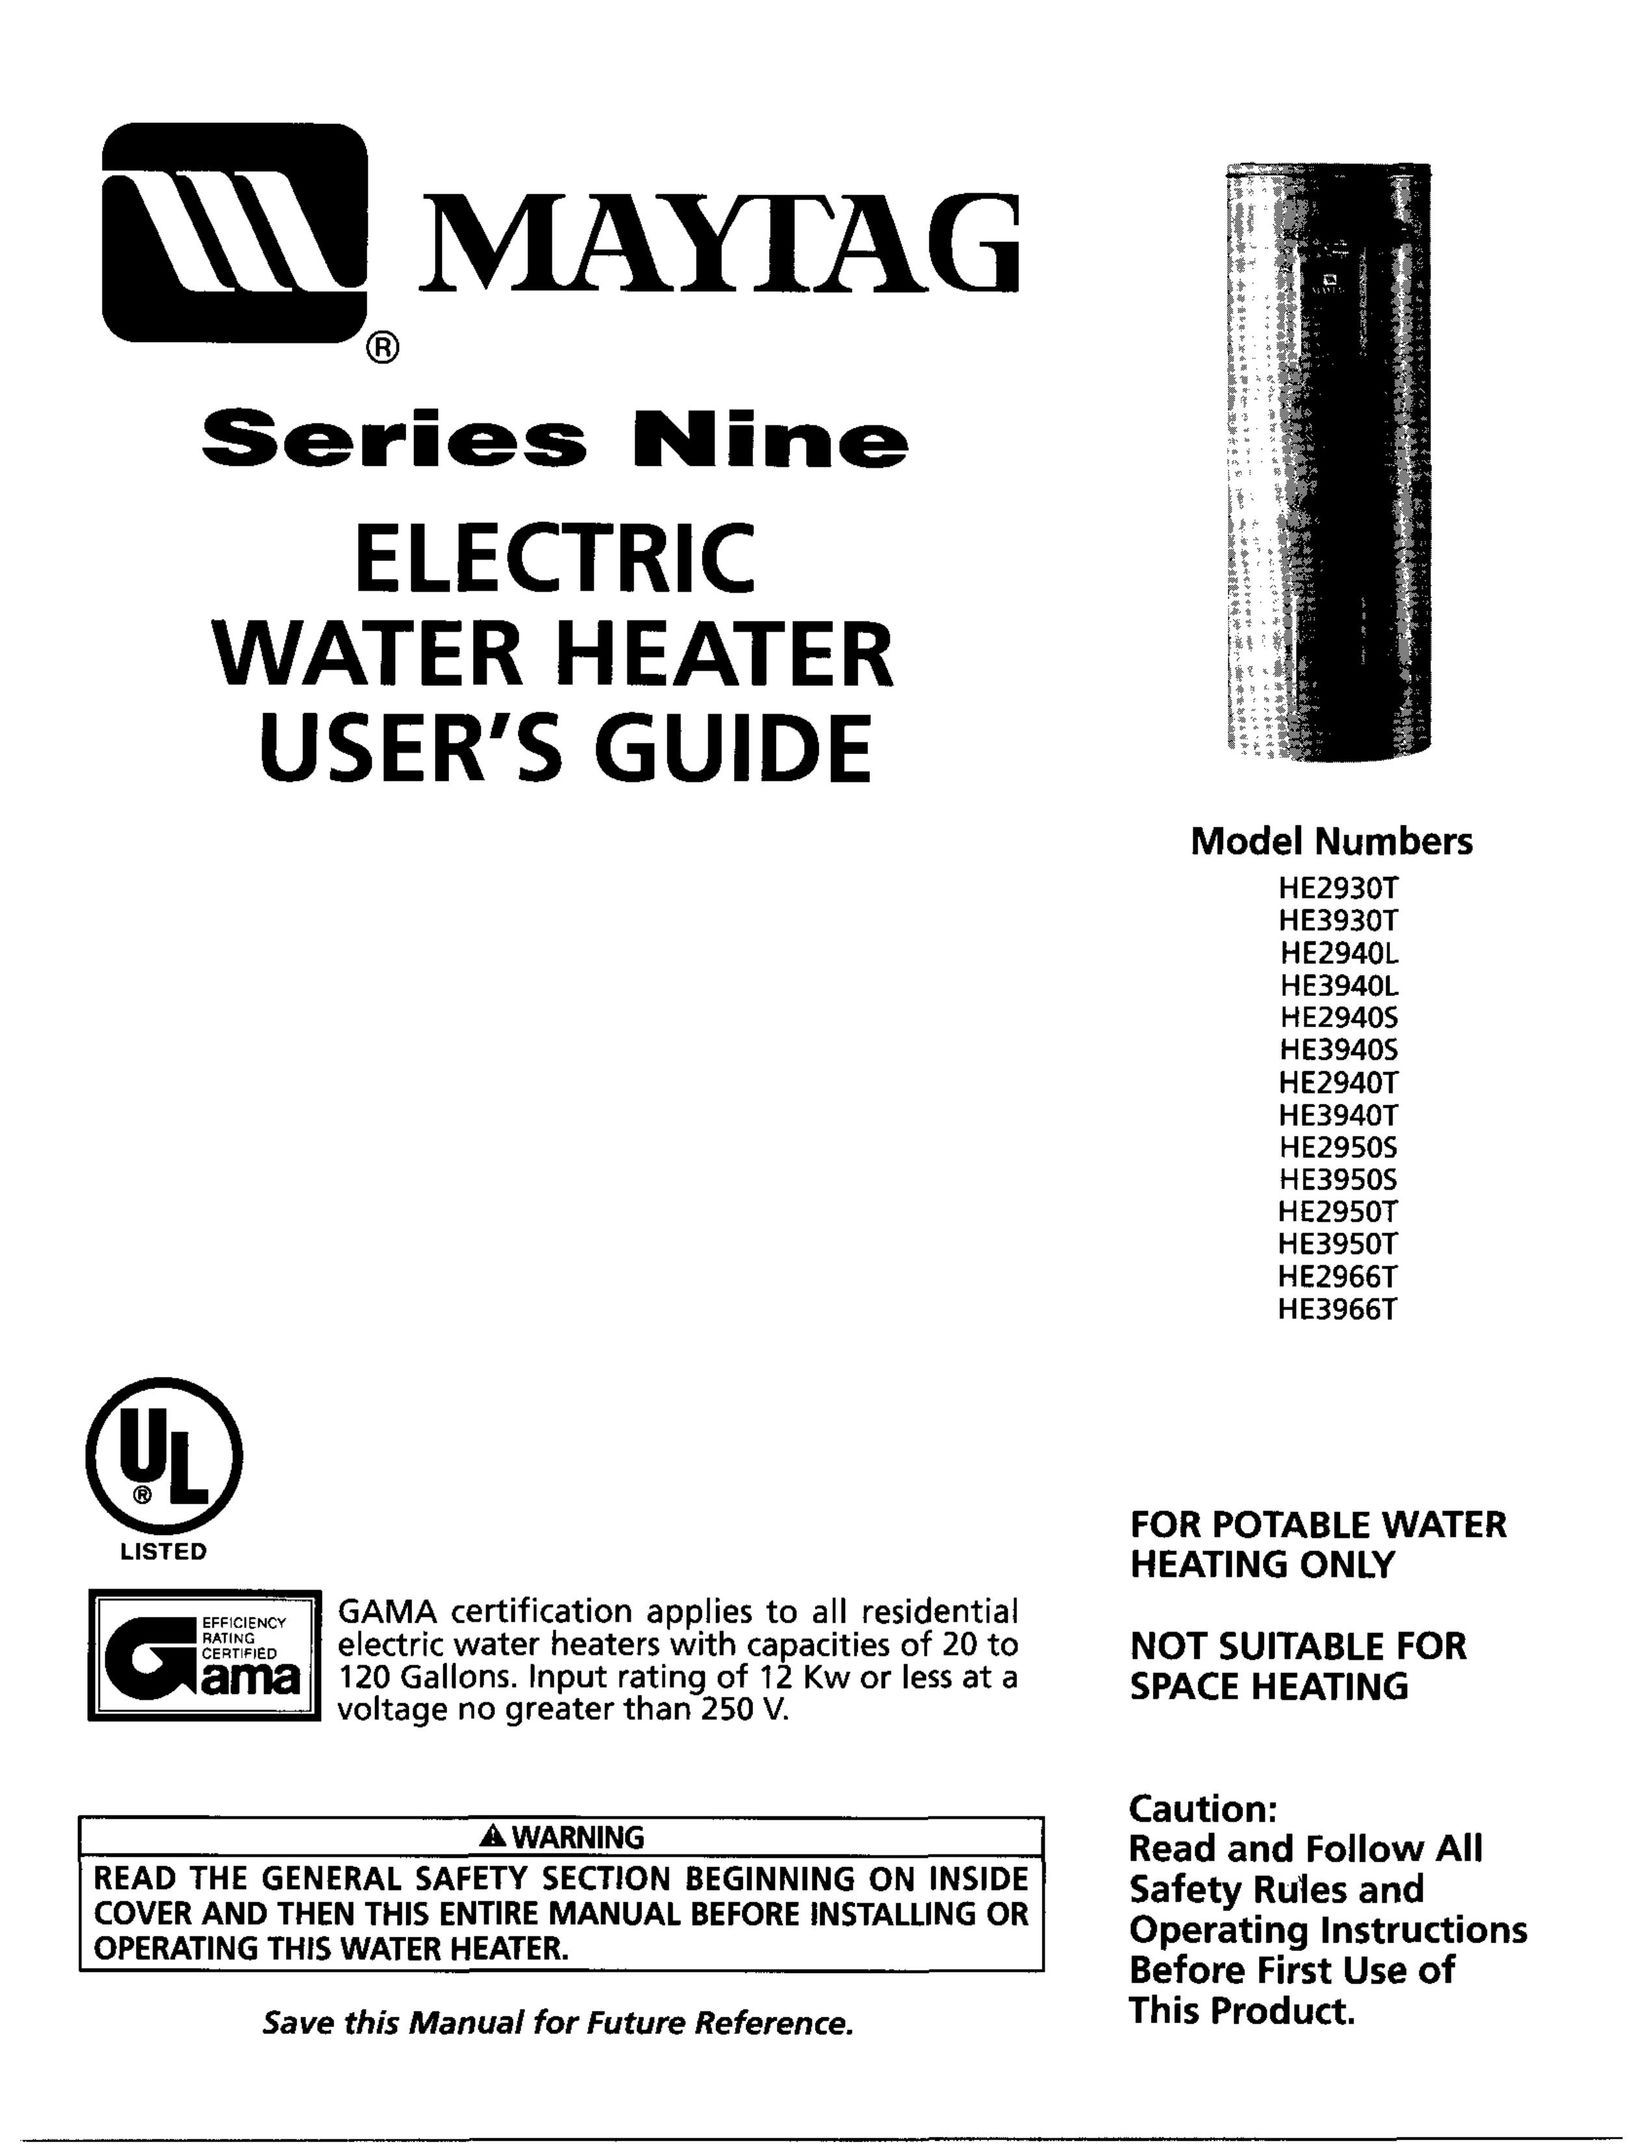 Maytag HE2940L Water Heater User Manual